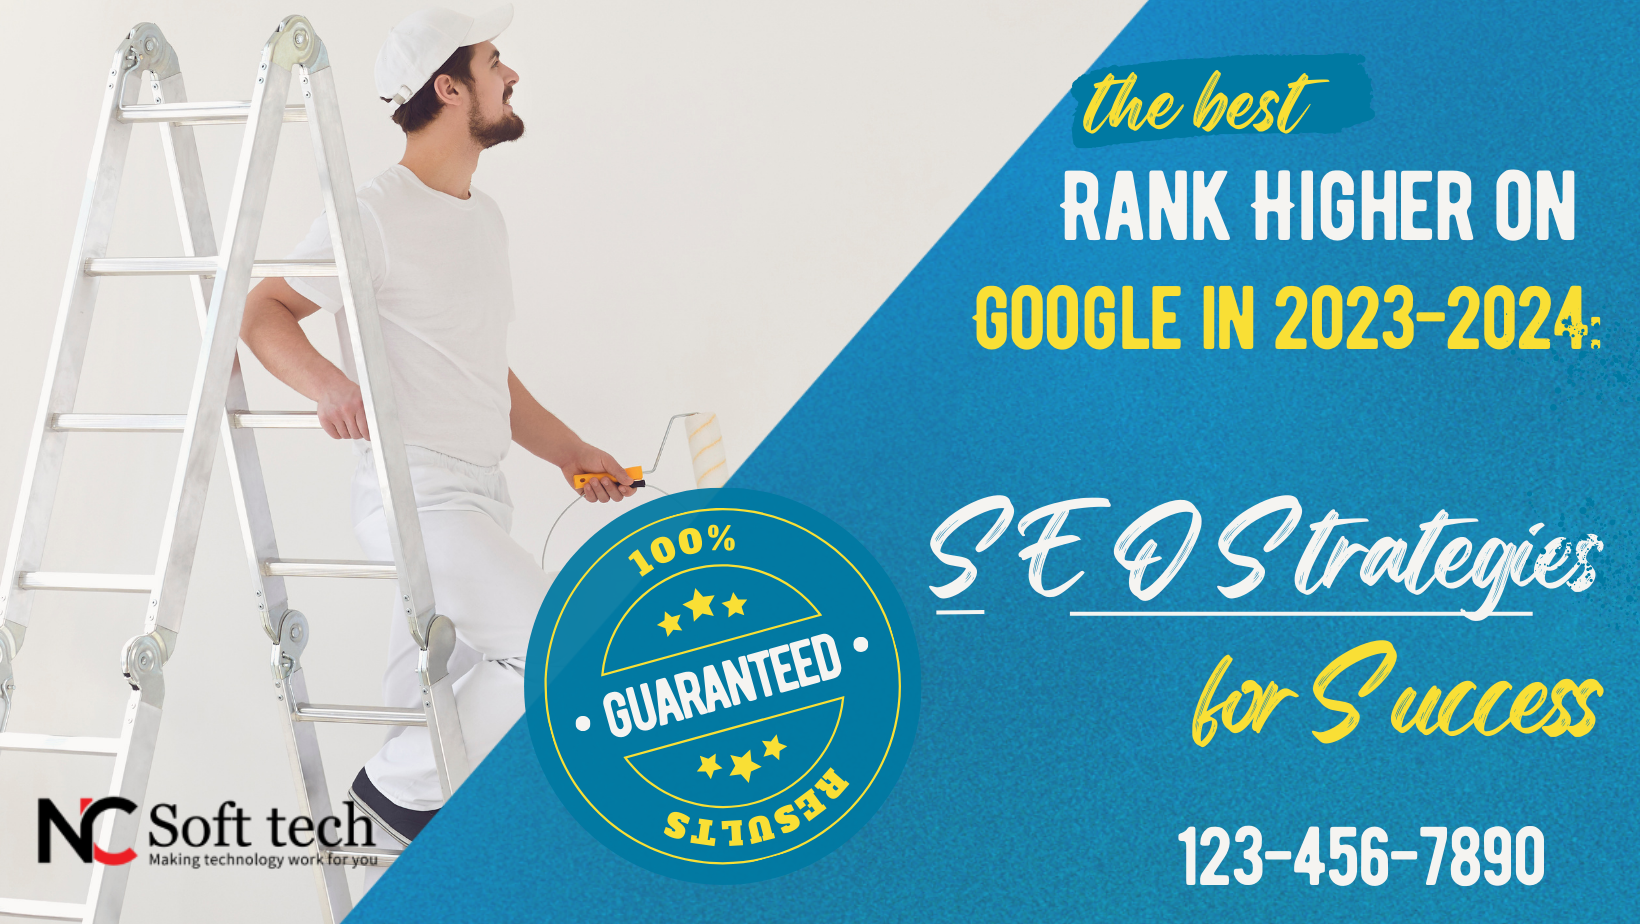 How to Rank Higher on Google in 2023-2024: SEO Strategies for Success